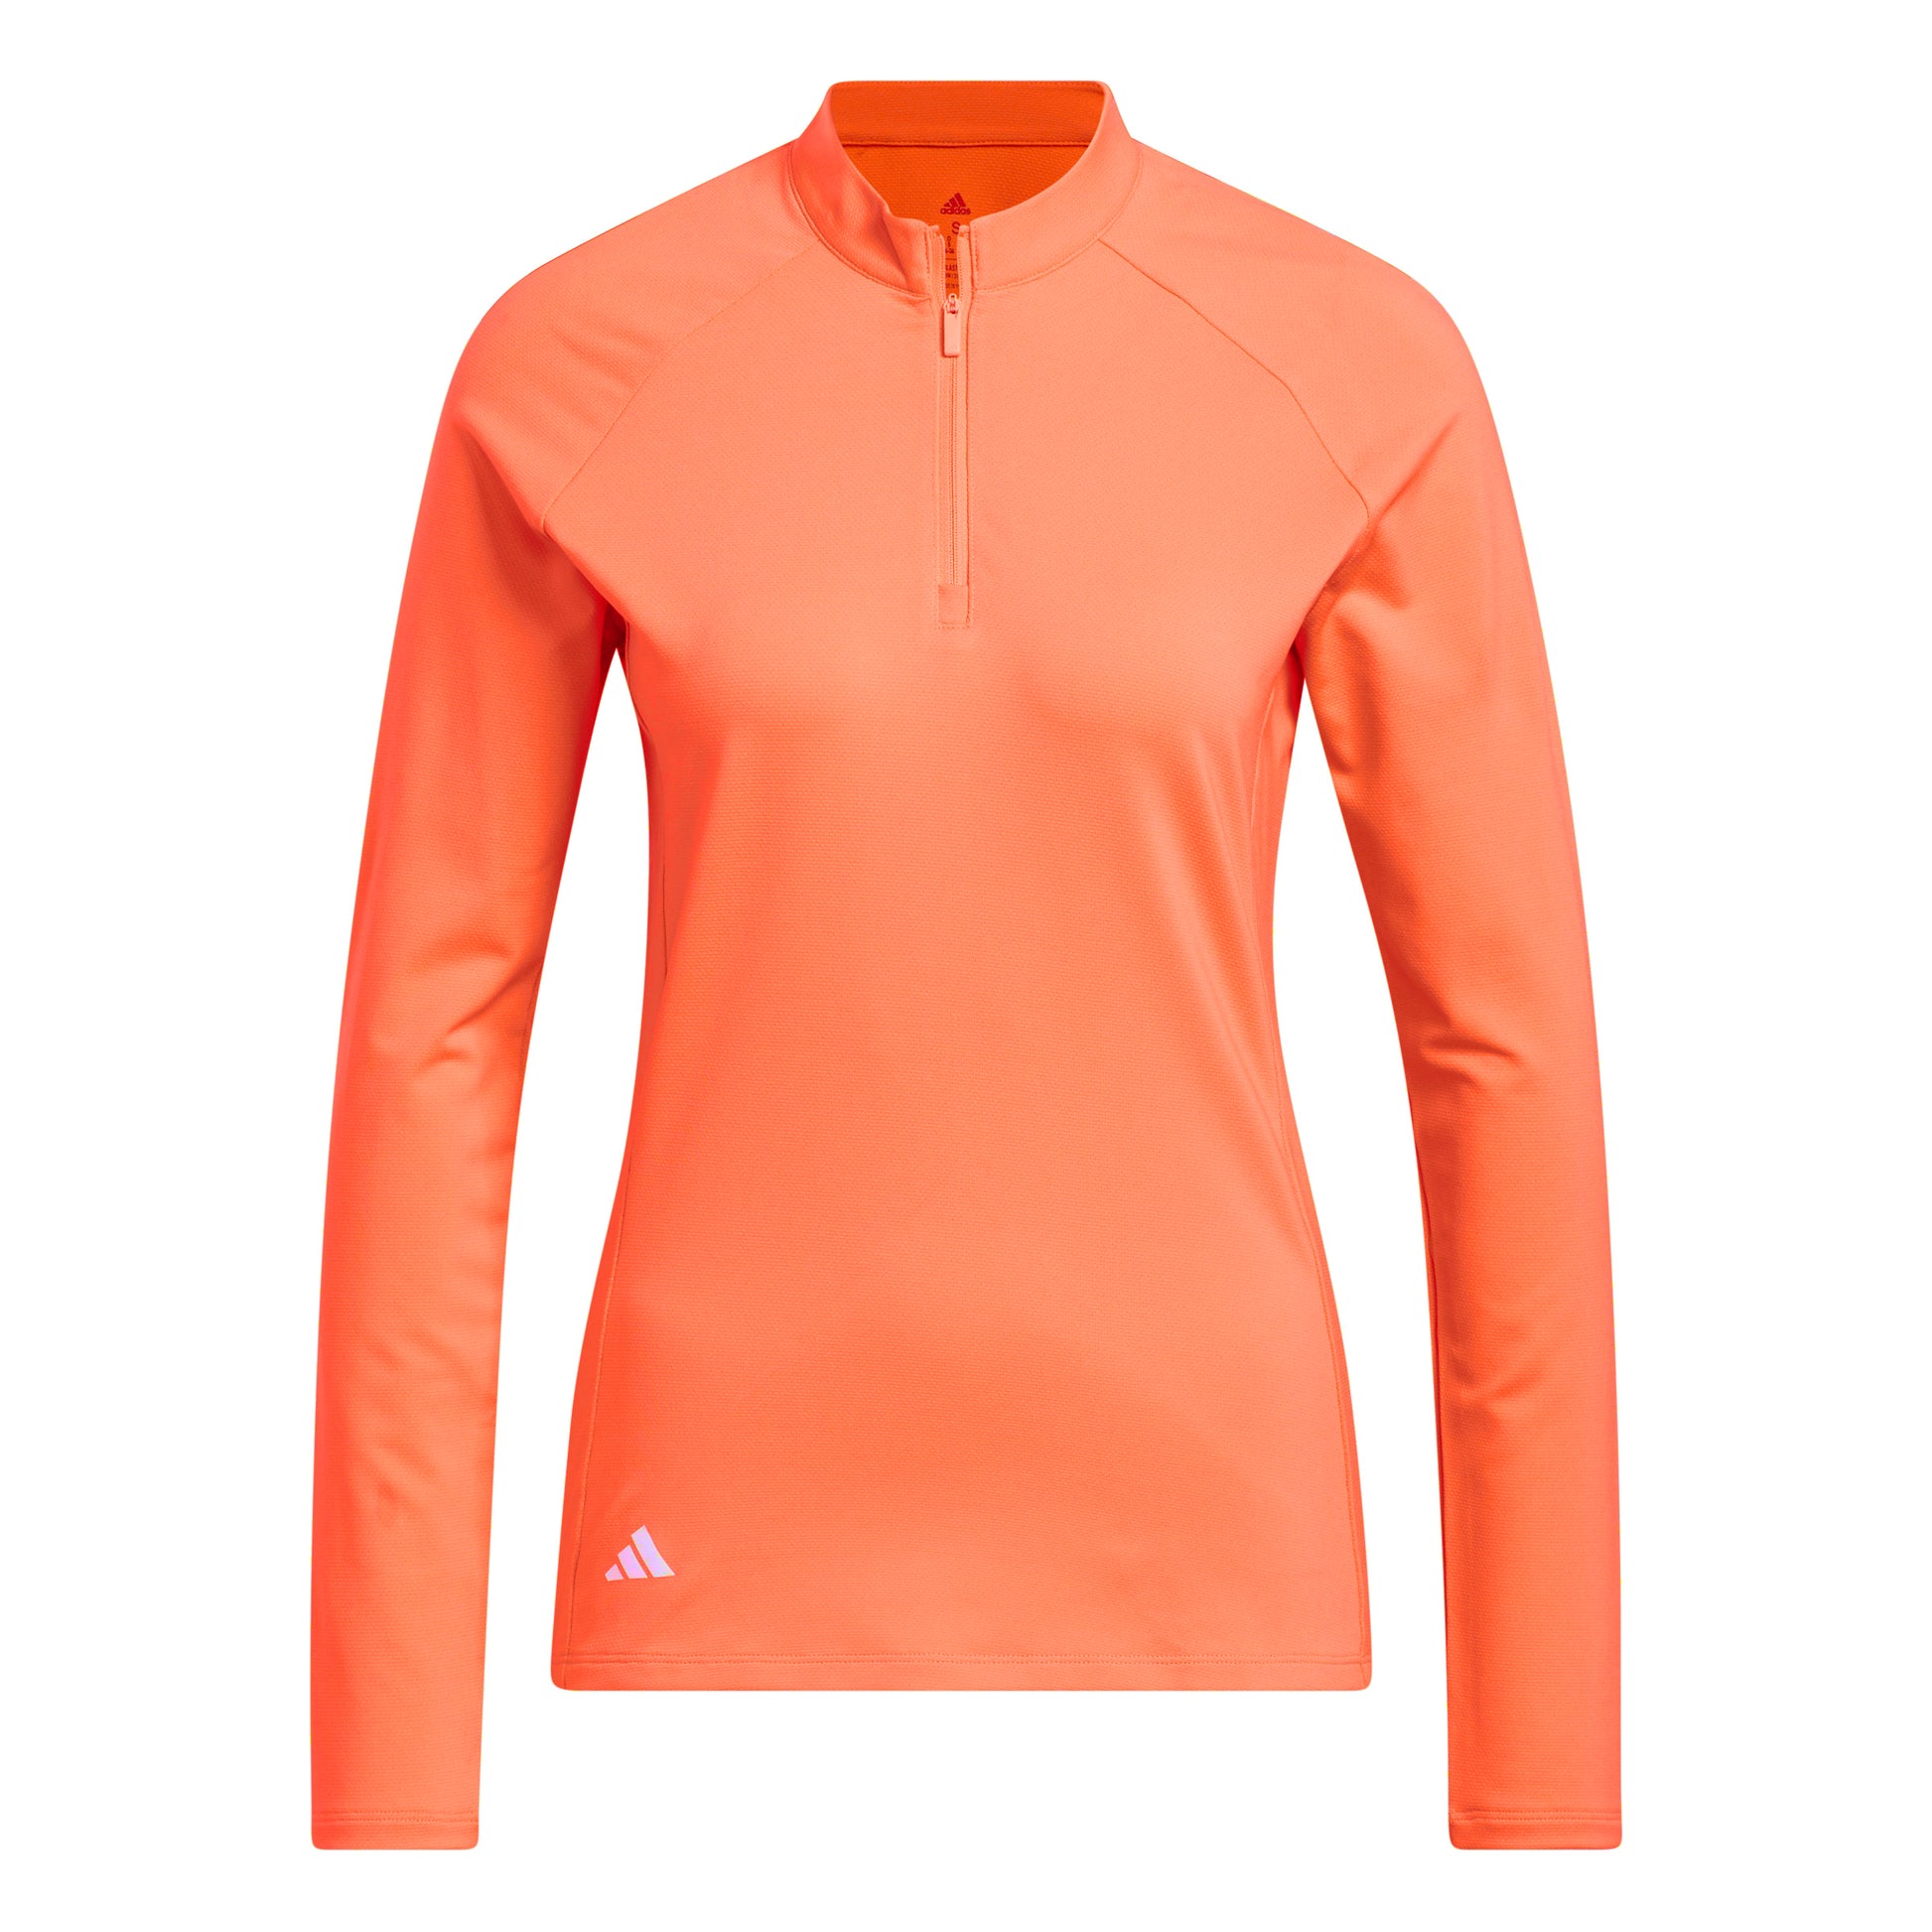 adidas Ladies Long Sleeve Zip-Neck Golf Top in Coral Fusion